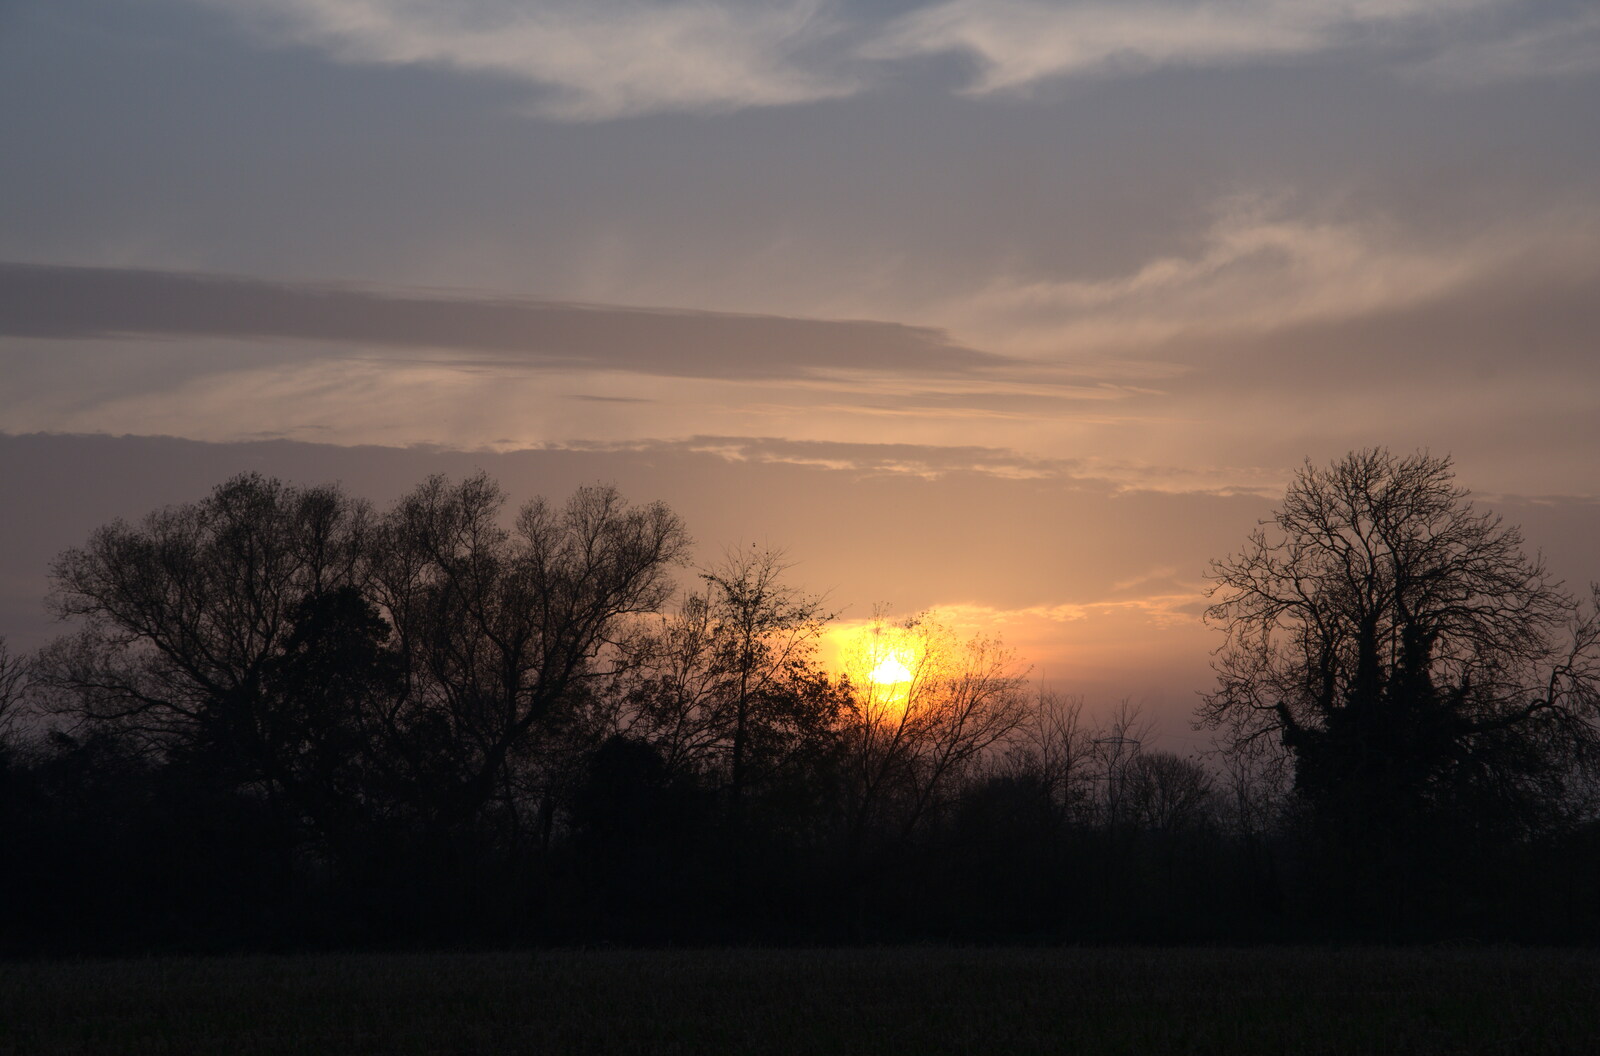 The sun sets further from To See the Hairy Pigs, Thrandeston, Suffolk - 7th November 2020